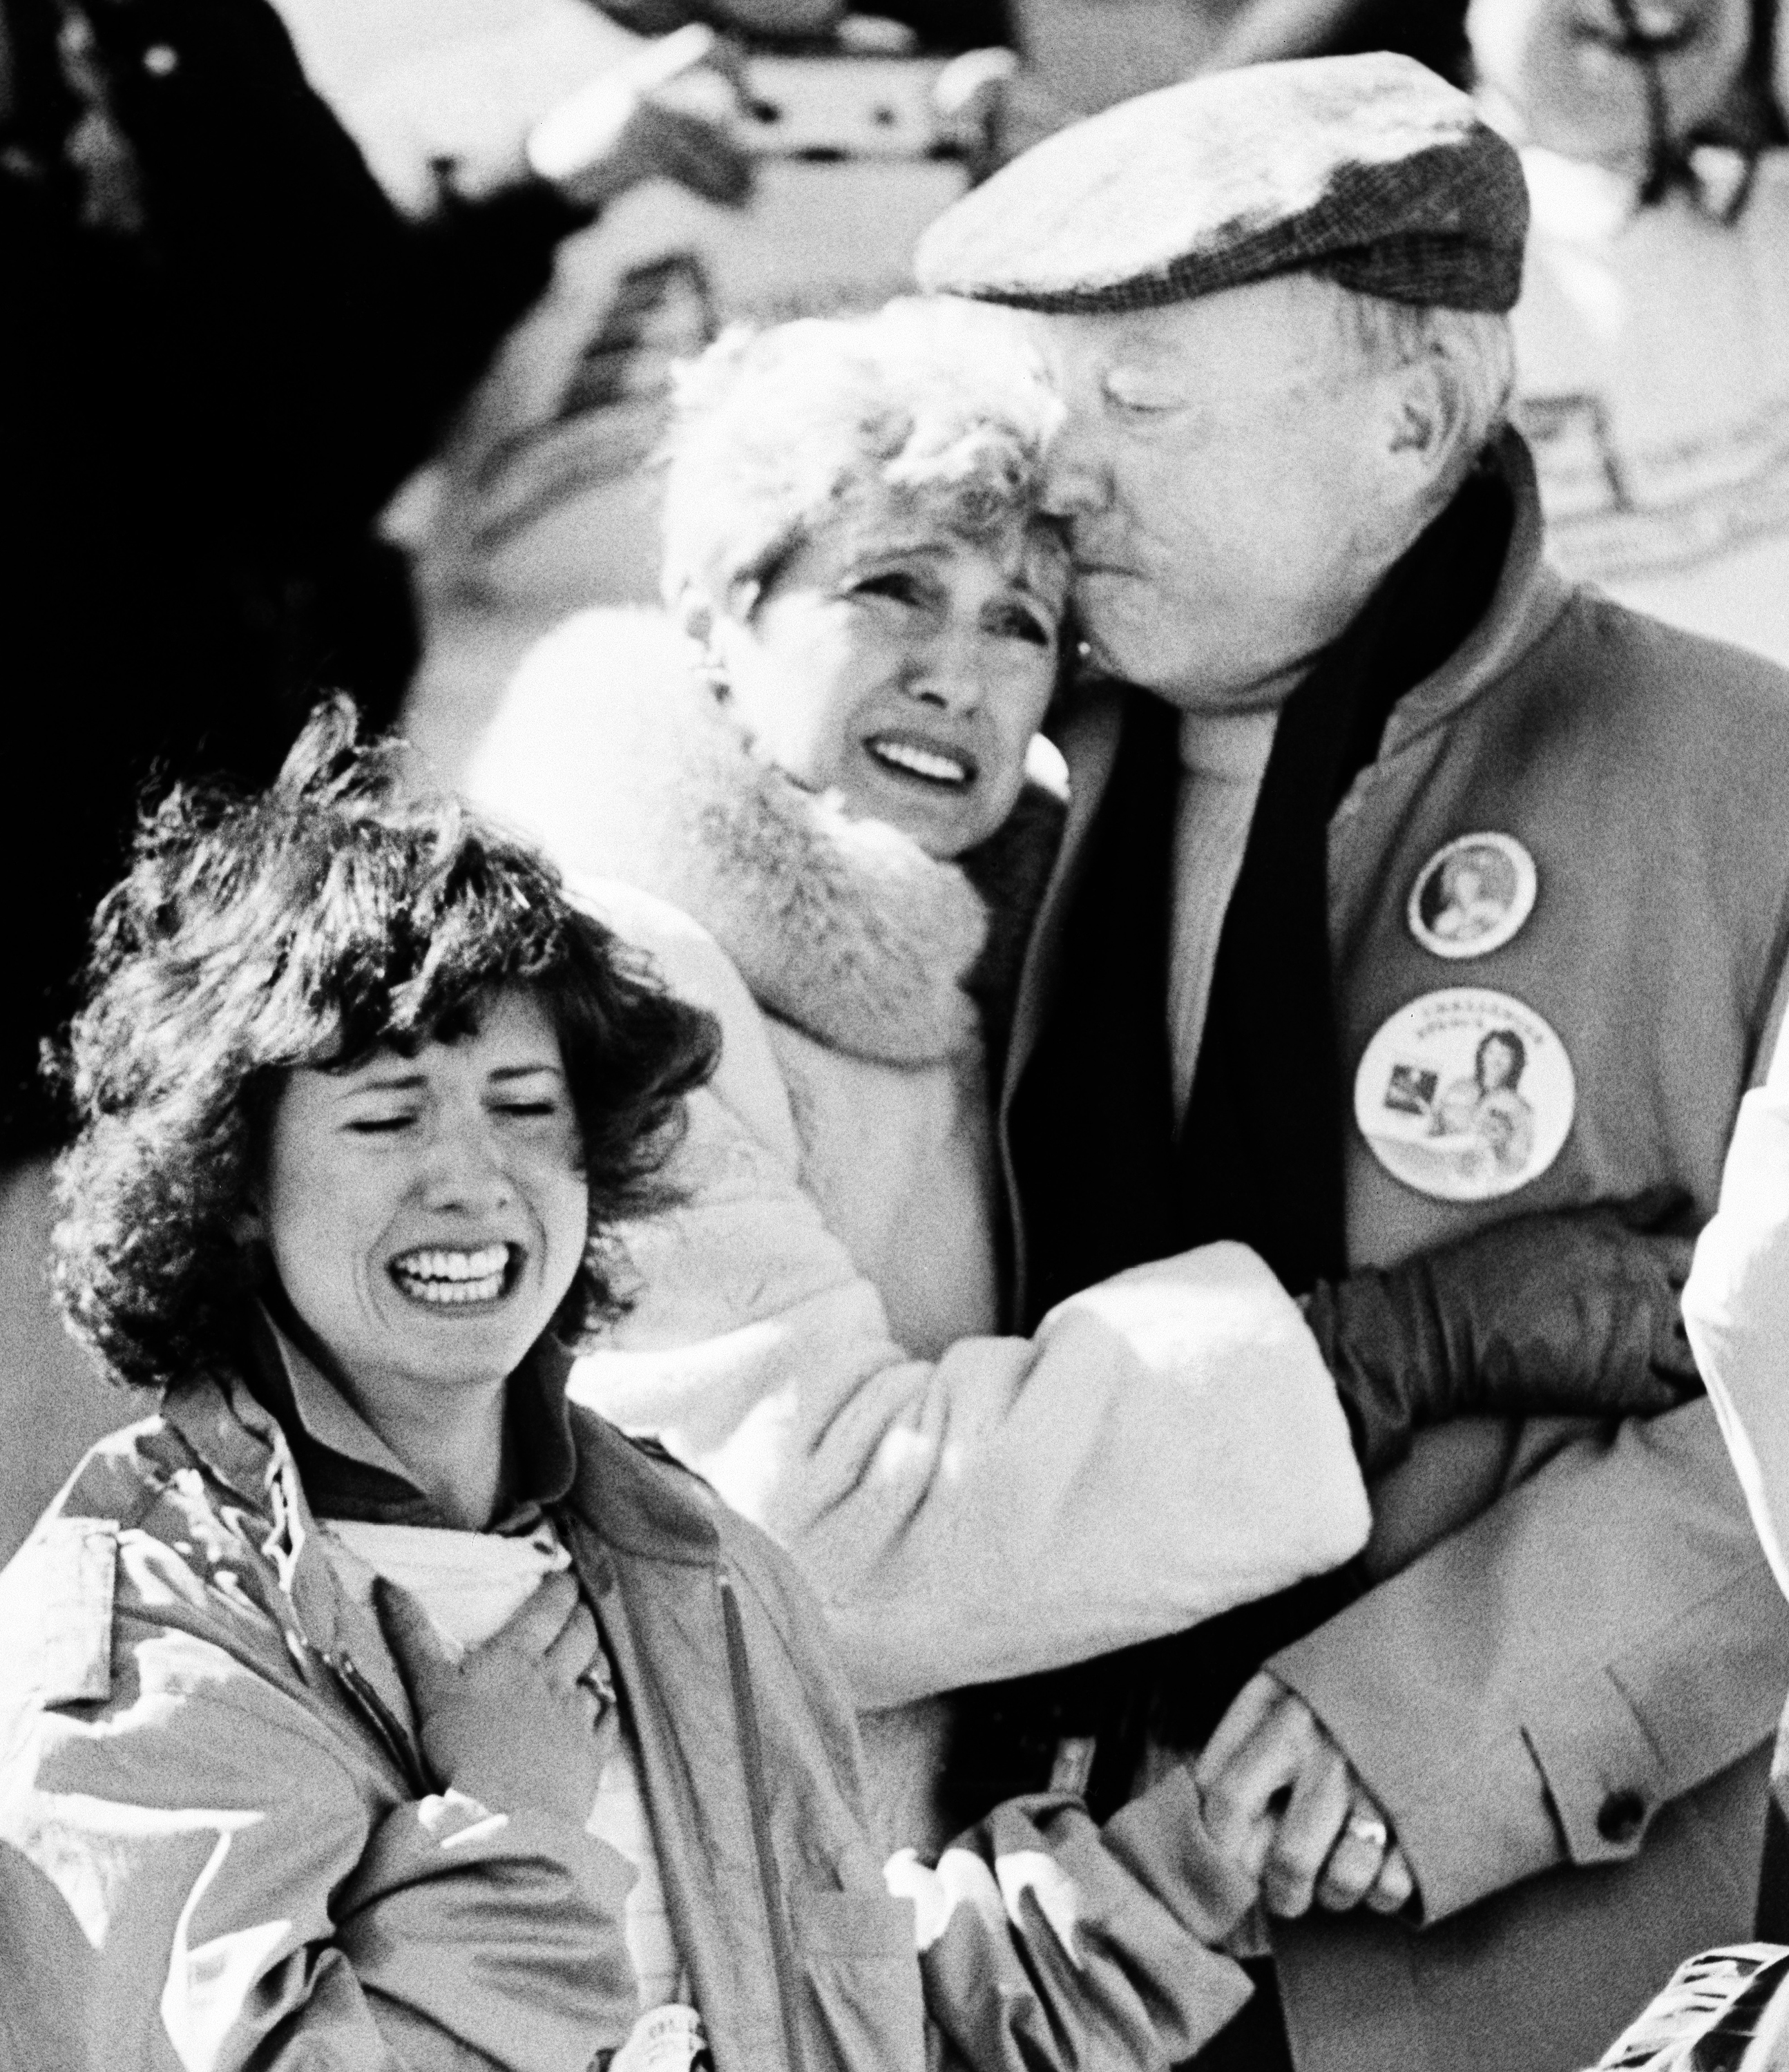 The family of Christa McAuliffe, a teacher who was America's first astronaut, realize the horror after the Space Shuttle orbiter Challenger blew apart after liftoff from Kennedy Space Center, Florida, Tuesday, Jan. 28, 1986. The sister of Christa, Betsy, left, and parents Grace and Ed Corrigan console each other after the explosion. (AP Photo/Jim Cole)